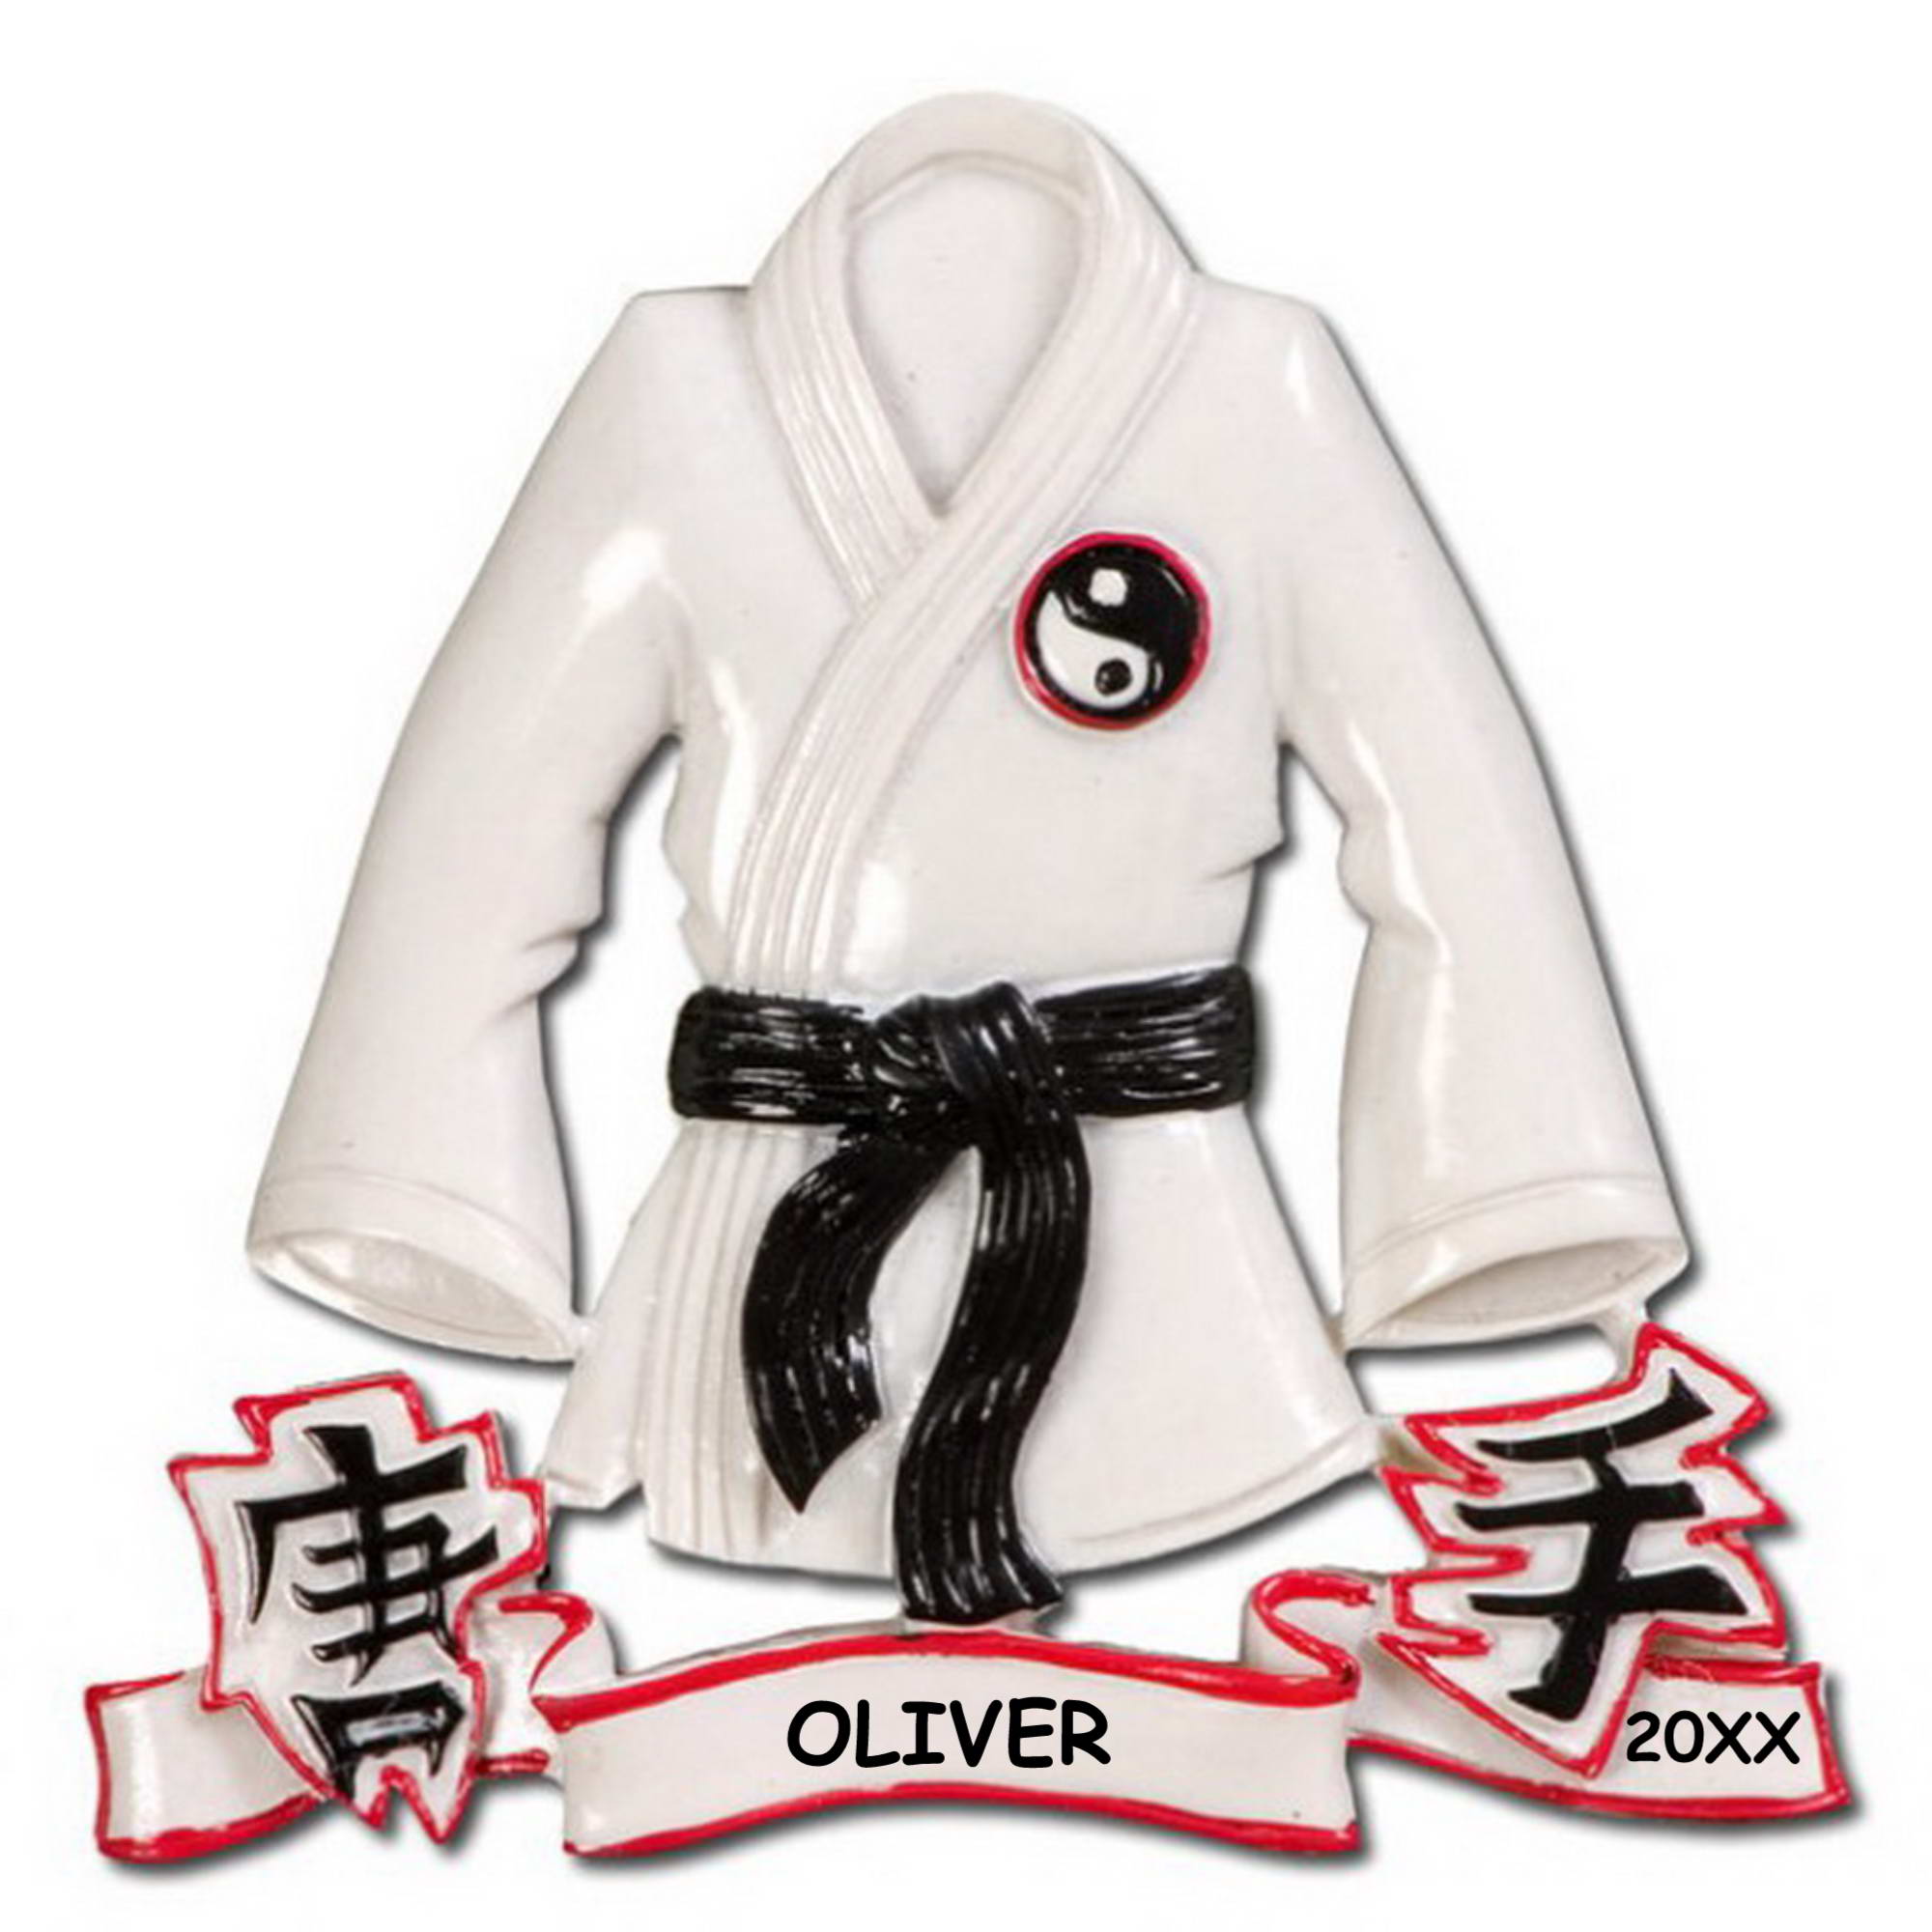 Personalized Martial Arts Sports Christmas Ornament